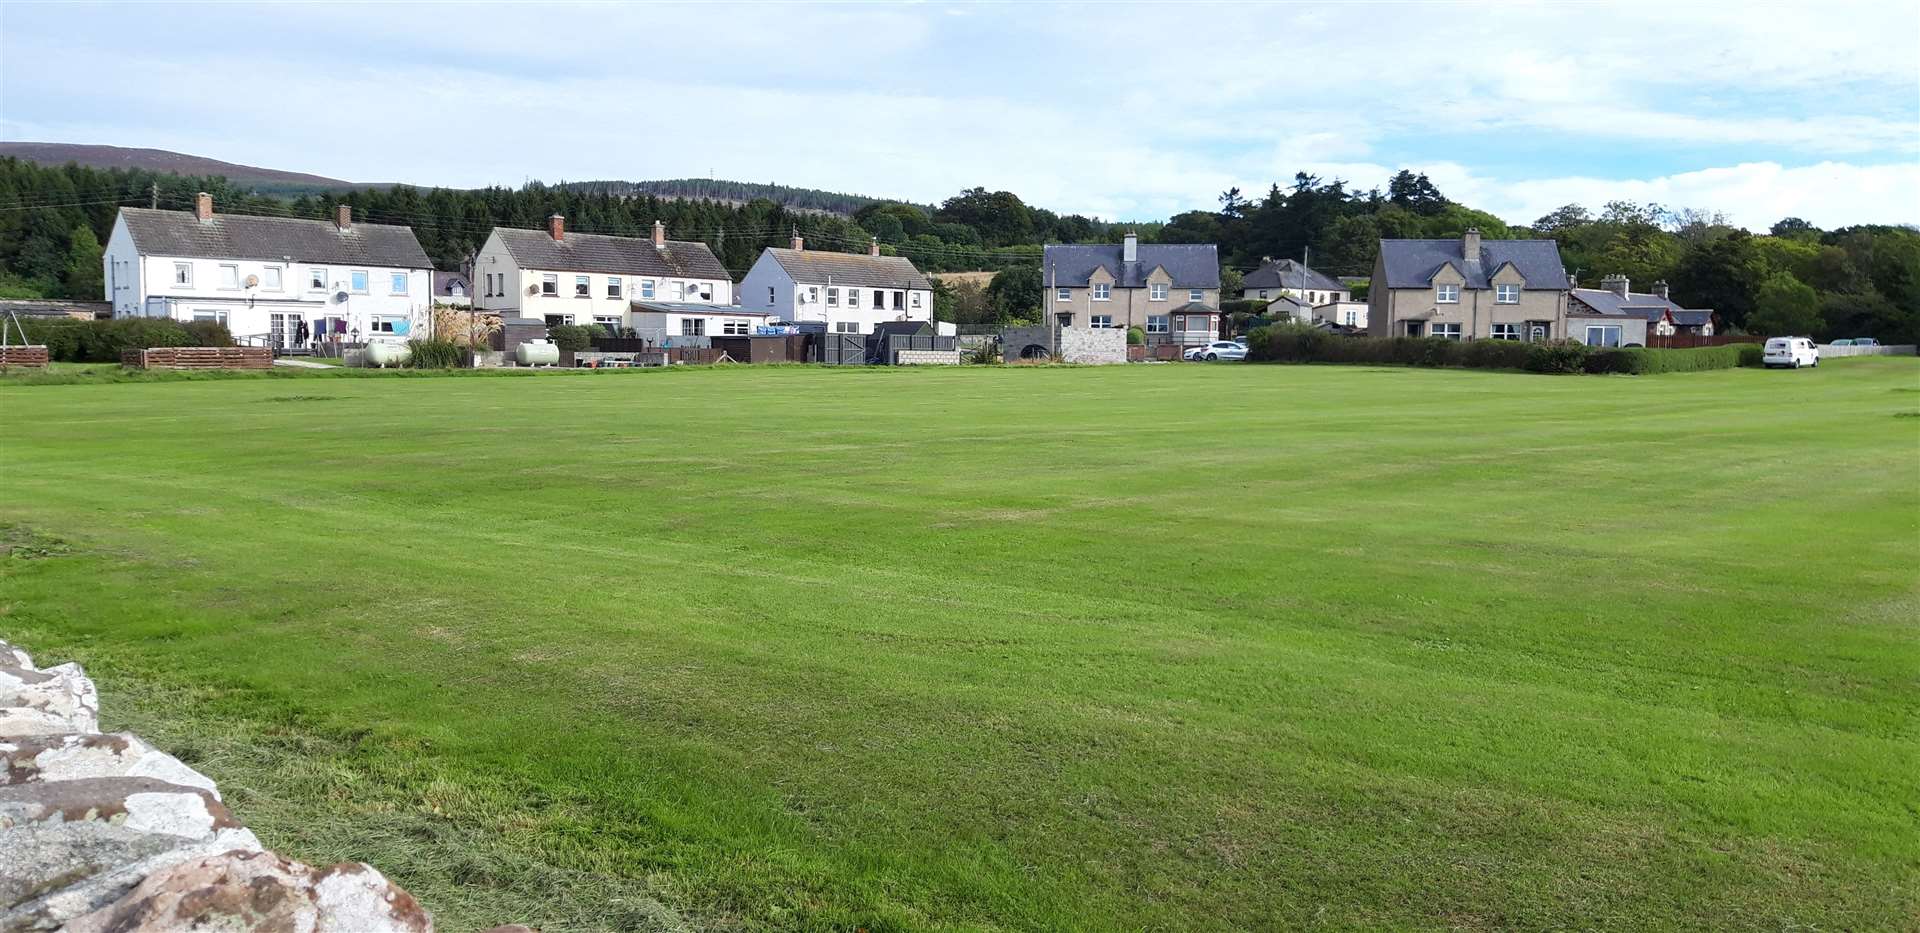 The site earmarked for new housing is to the rear of Sibell Road and opposite Golspie Primary School’s playing fields